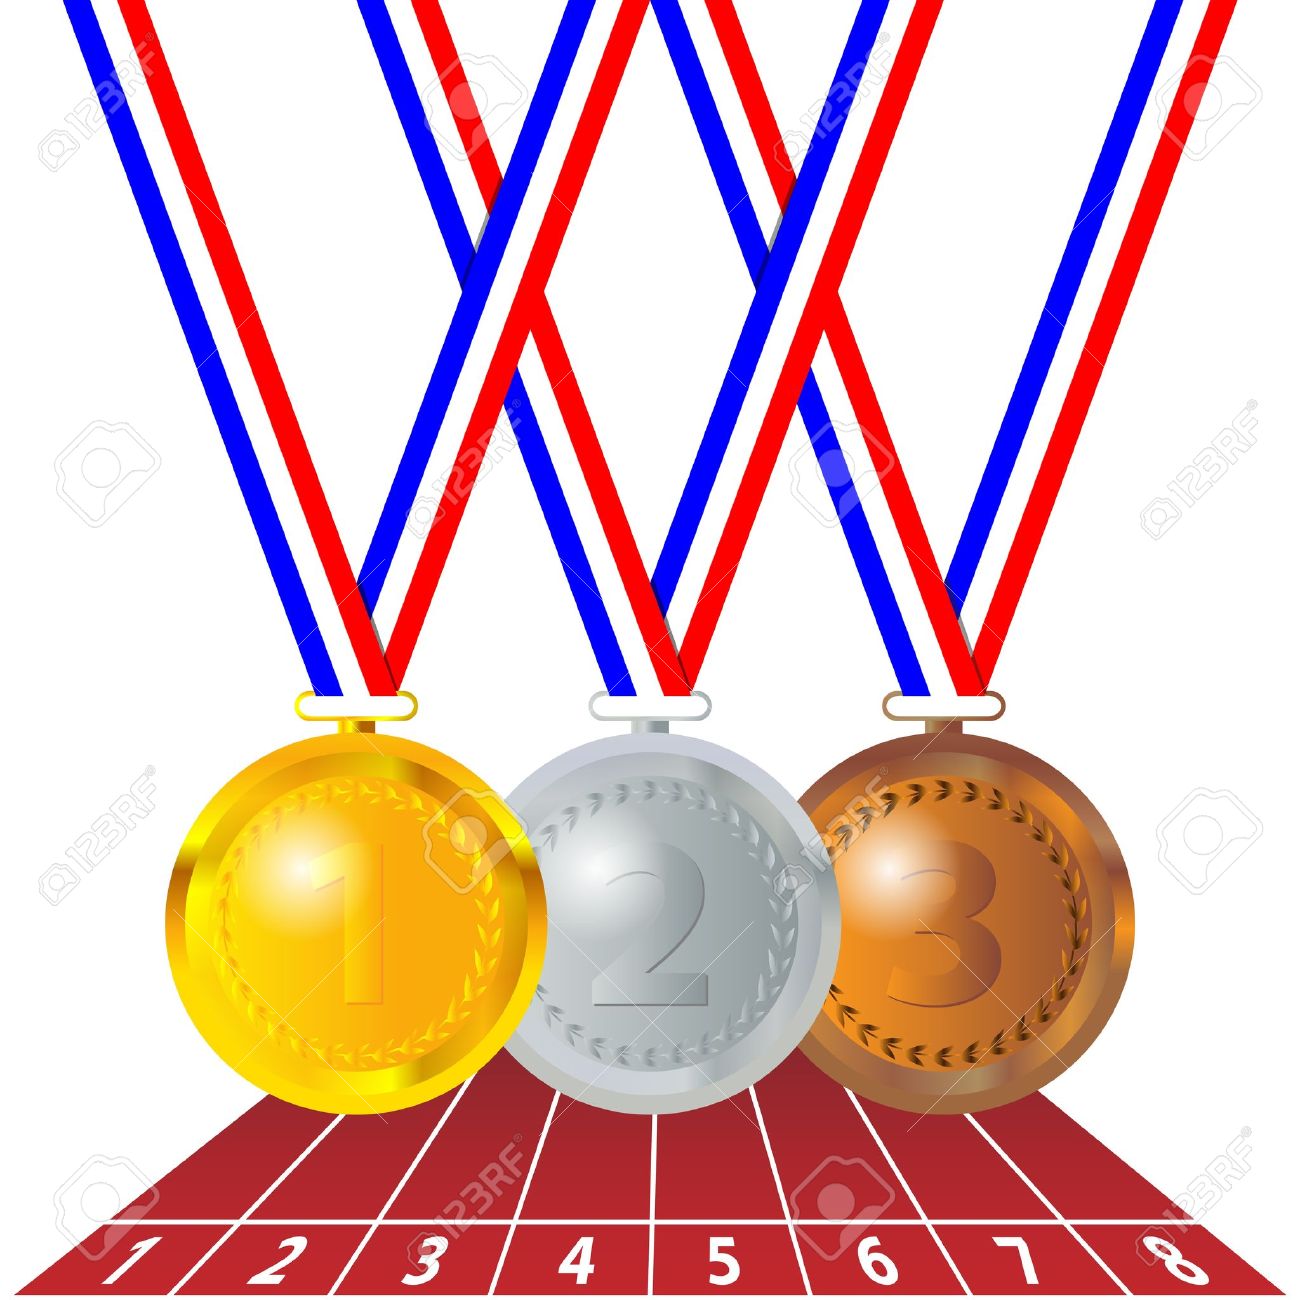 Olympic clipart medal certificate. Free download best 